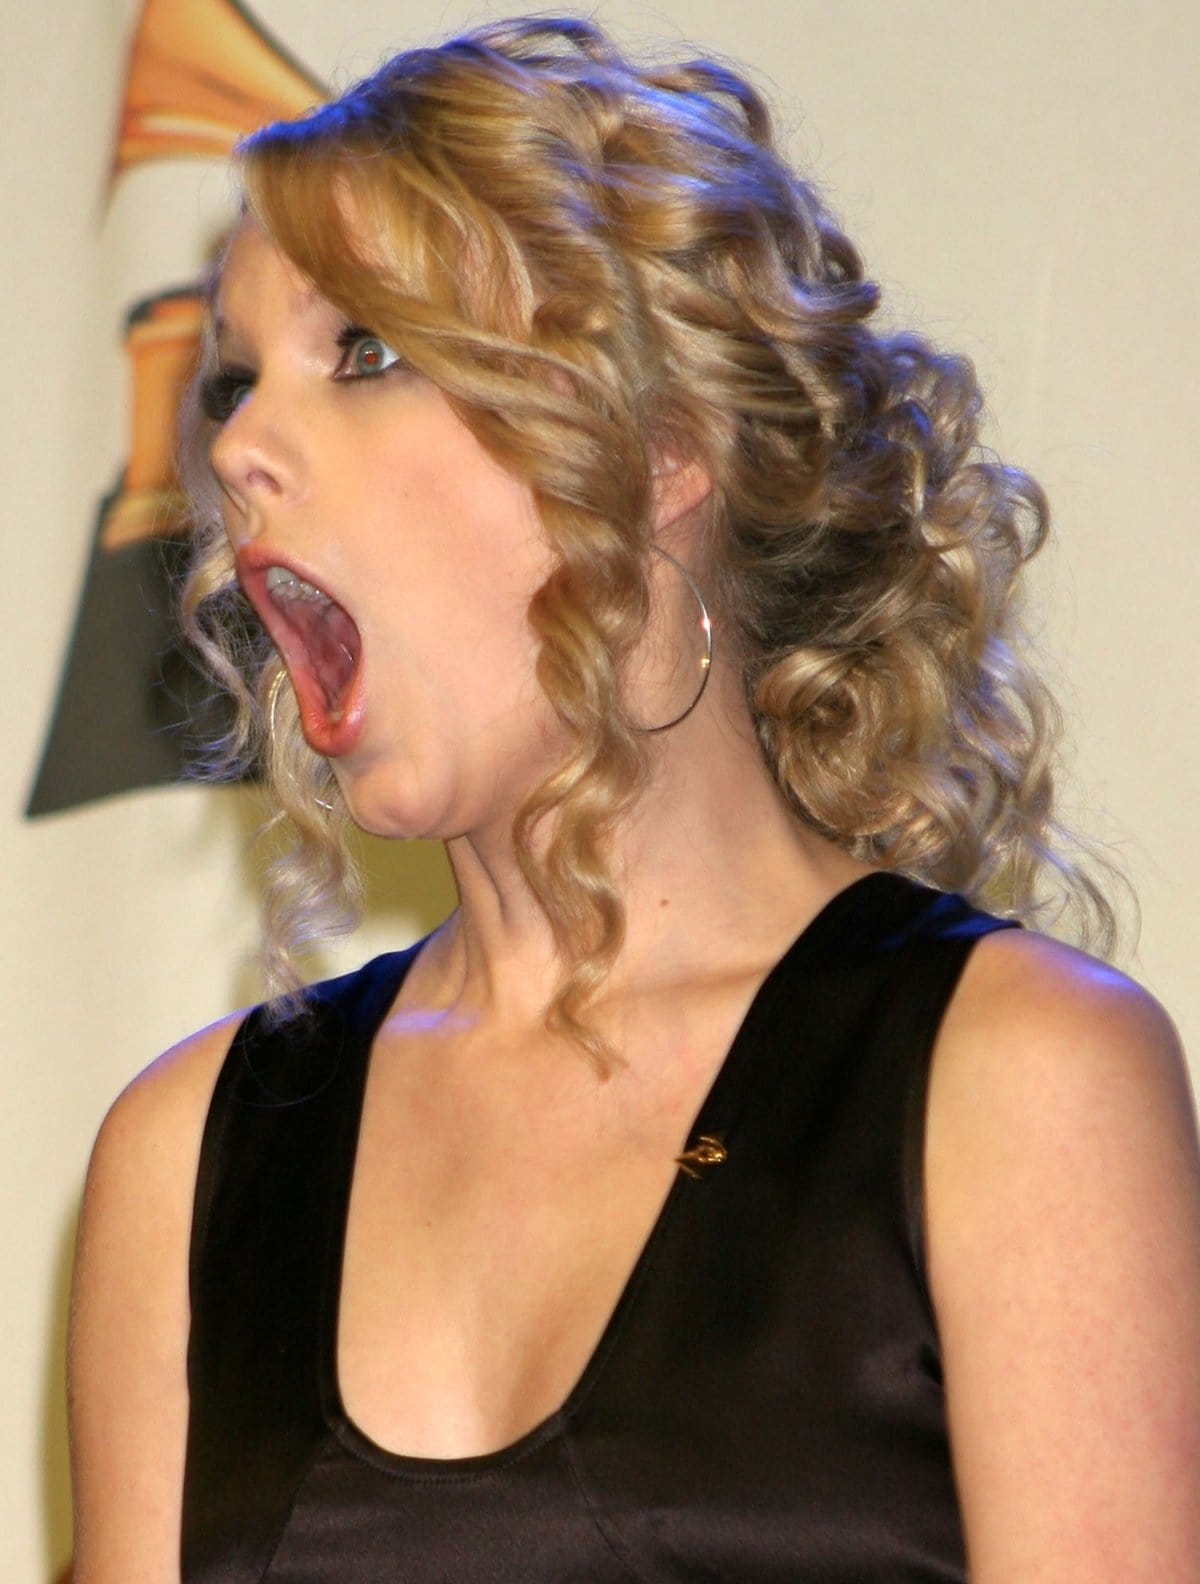 We imagine this is what Taylor Swift looks like whenever she sees her bank statement